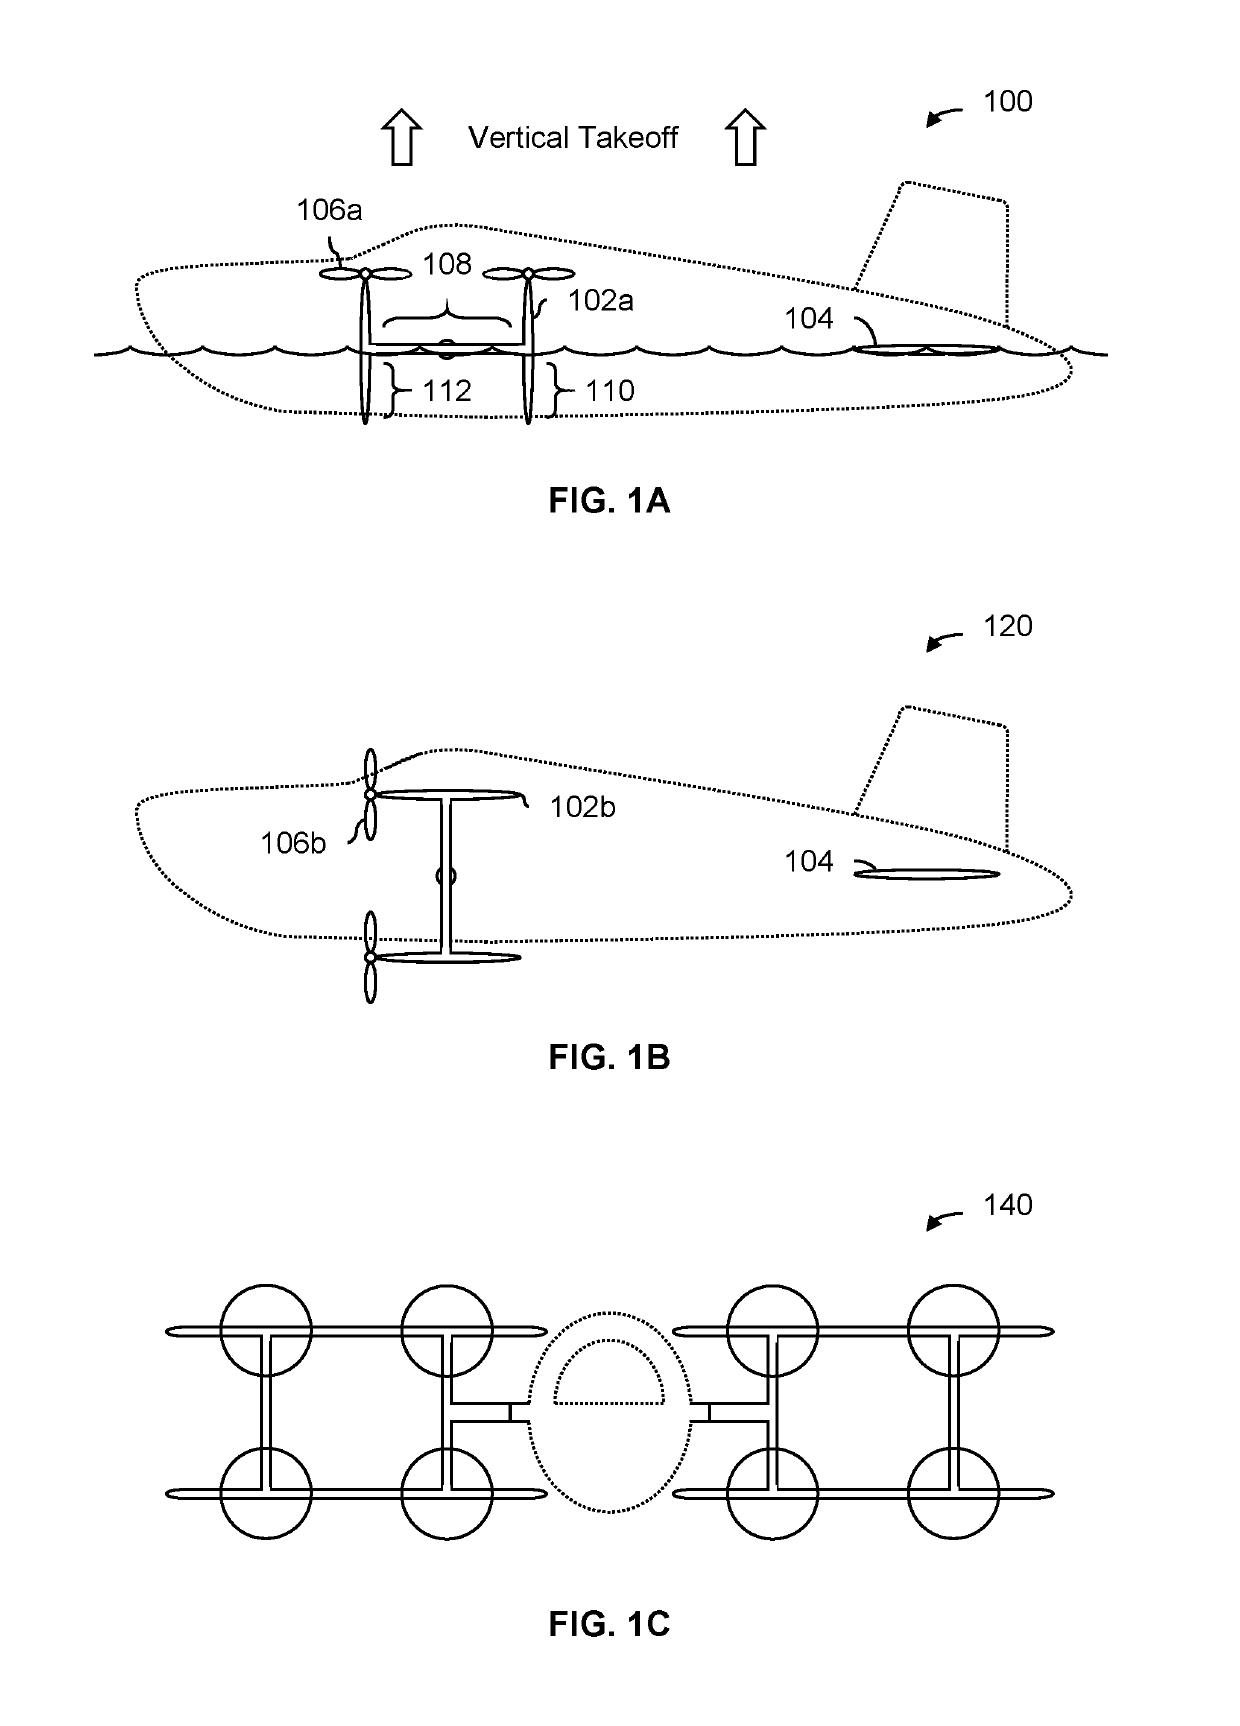 Integrated float-wing